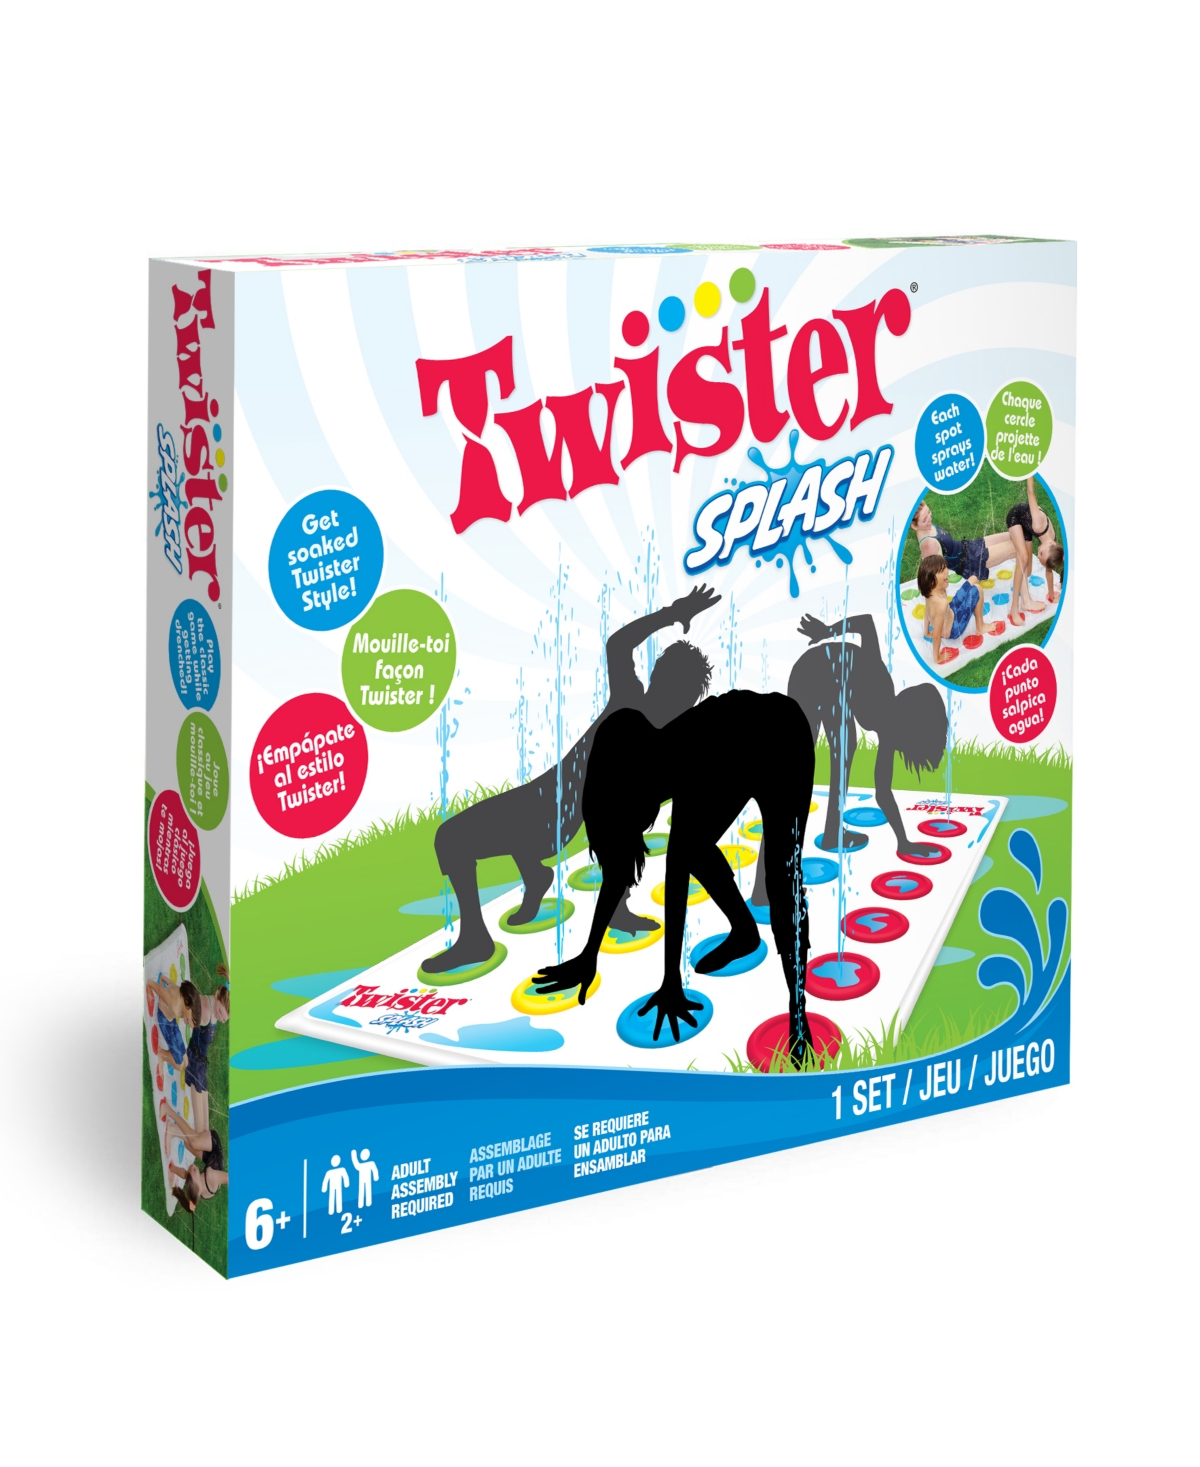 Hasbro Twister Splash Game By Wowwee In Multicolor